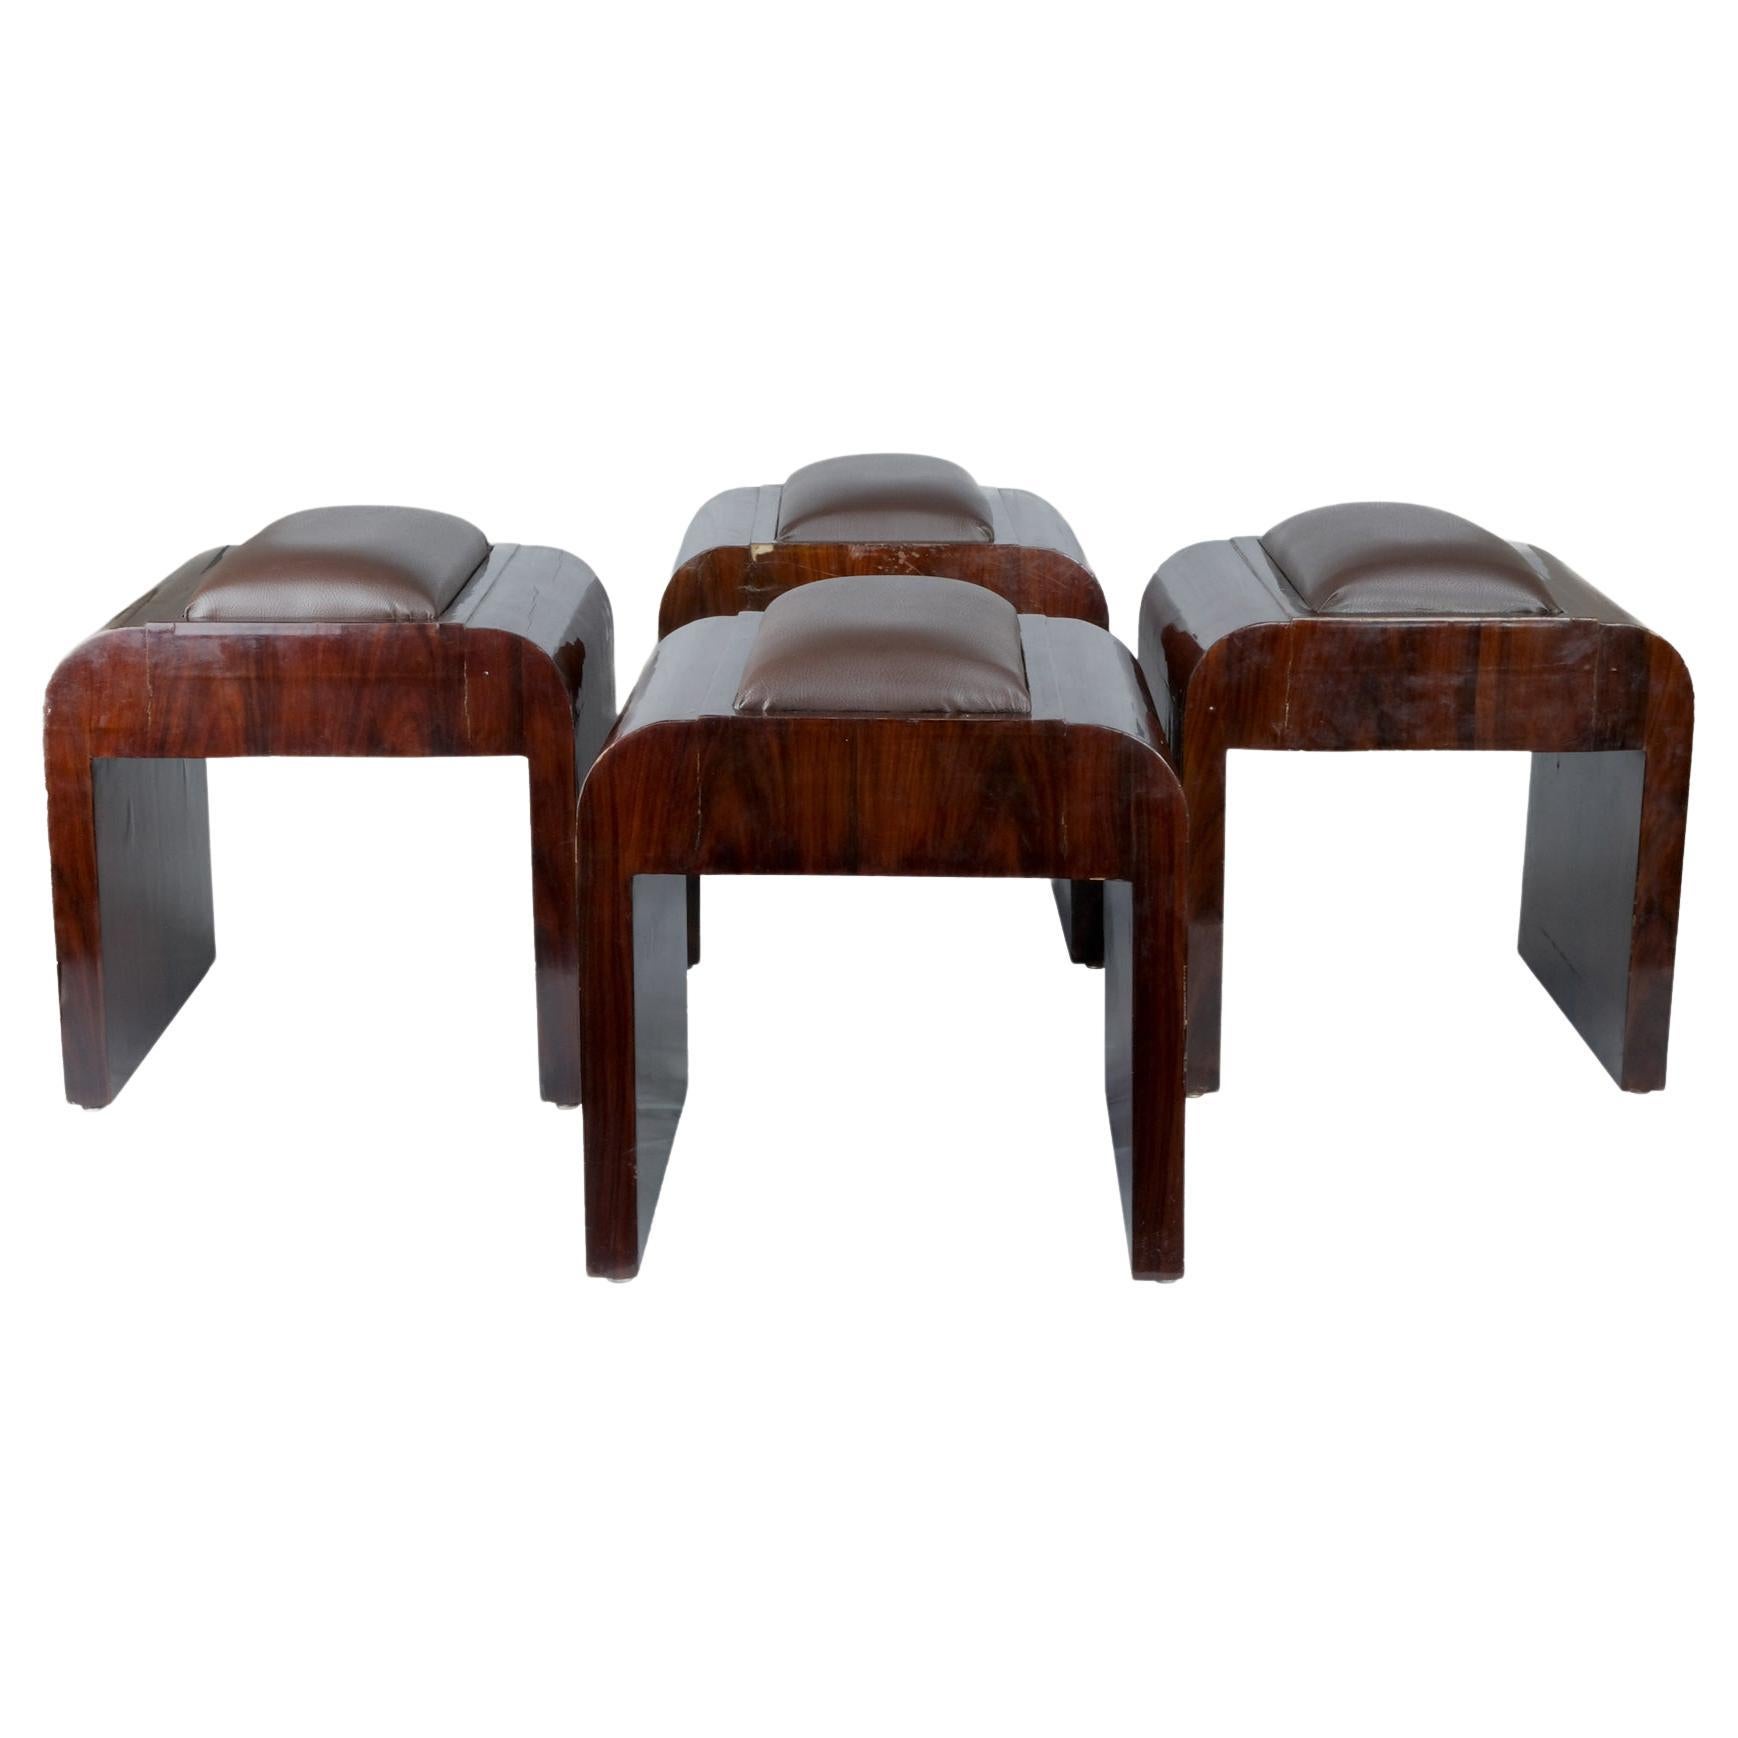 Four Art Deco stools from 1921, mahogany veneered wood trimmed with leather.